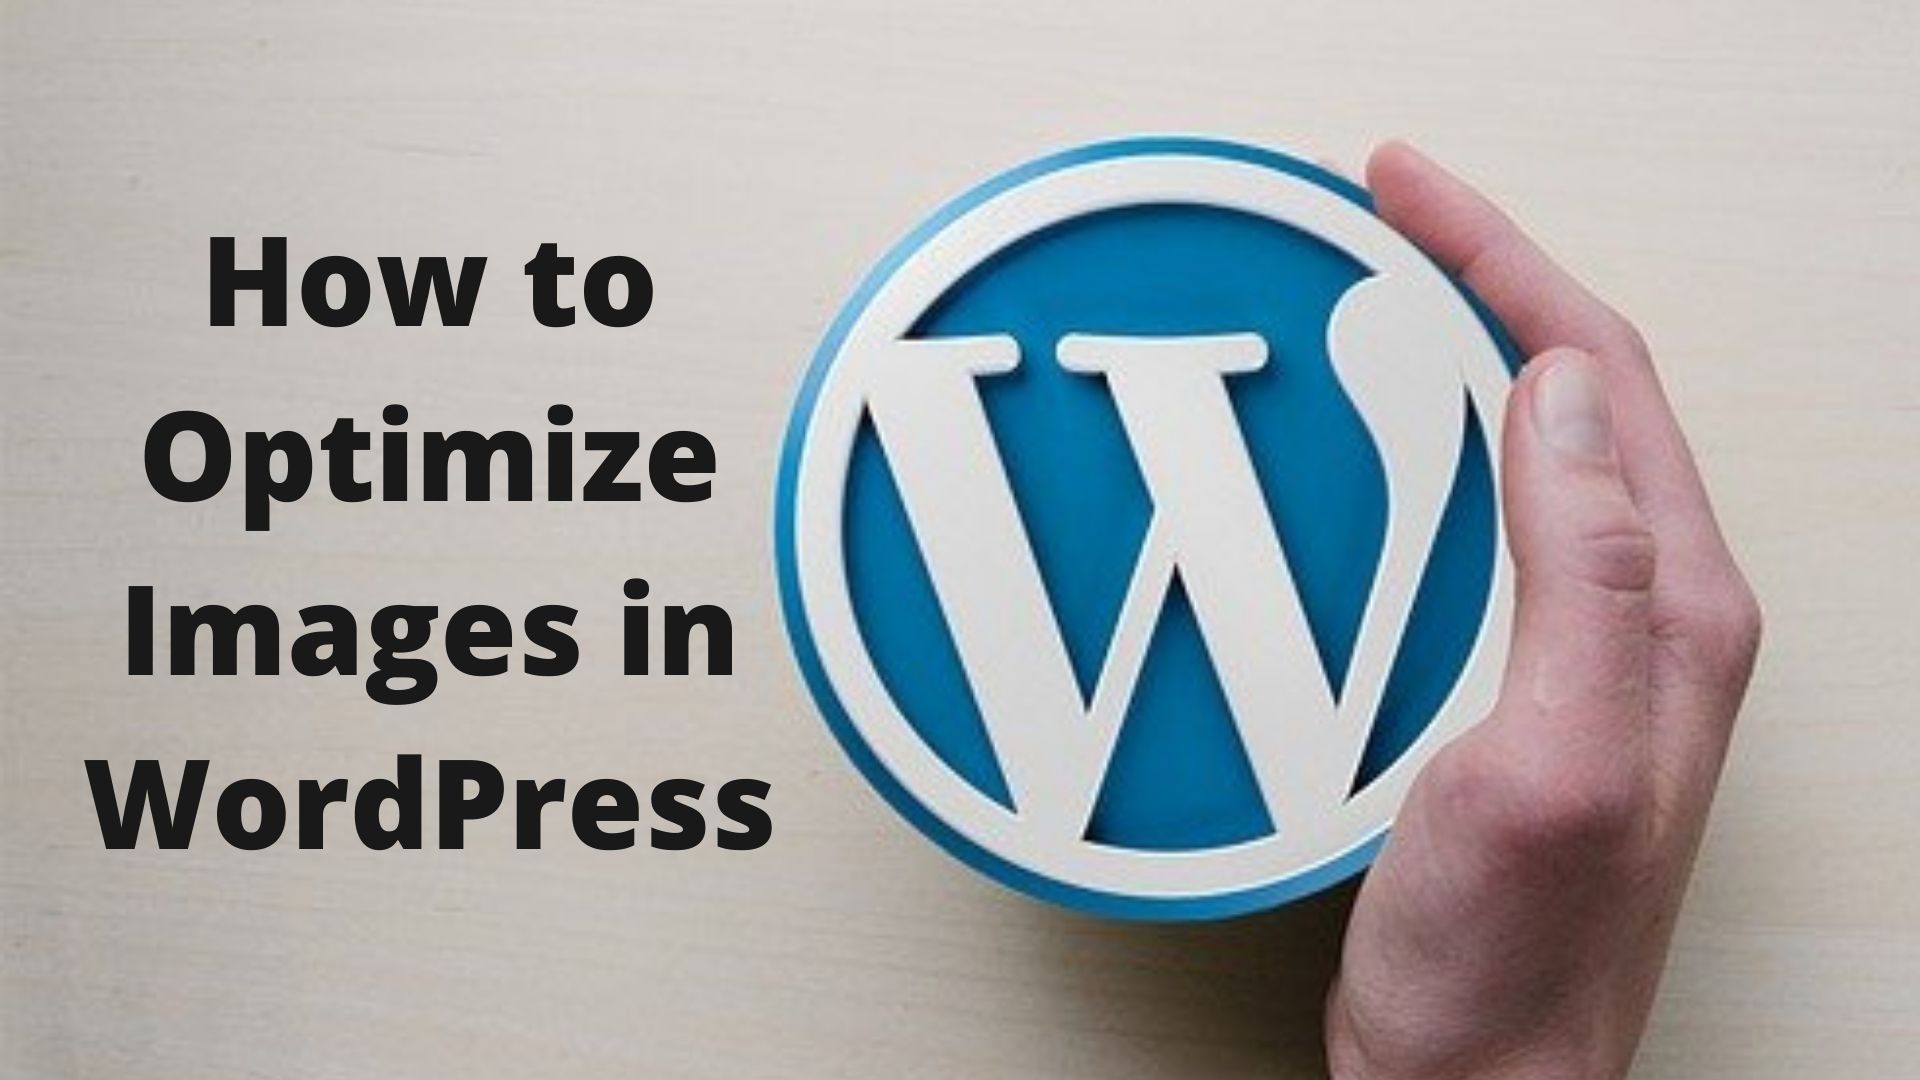 How to Optimize Images in WordPress